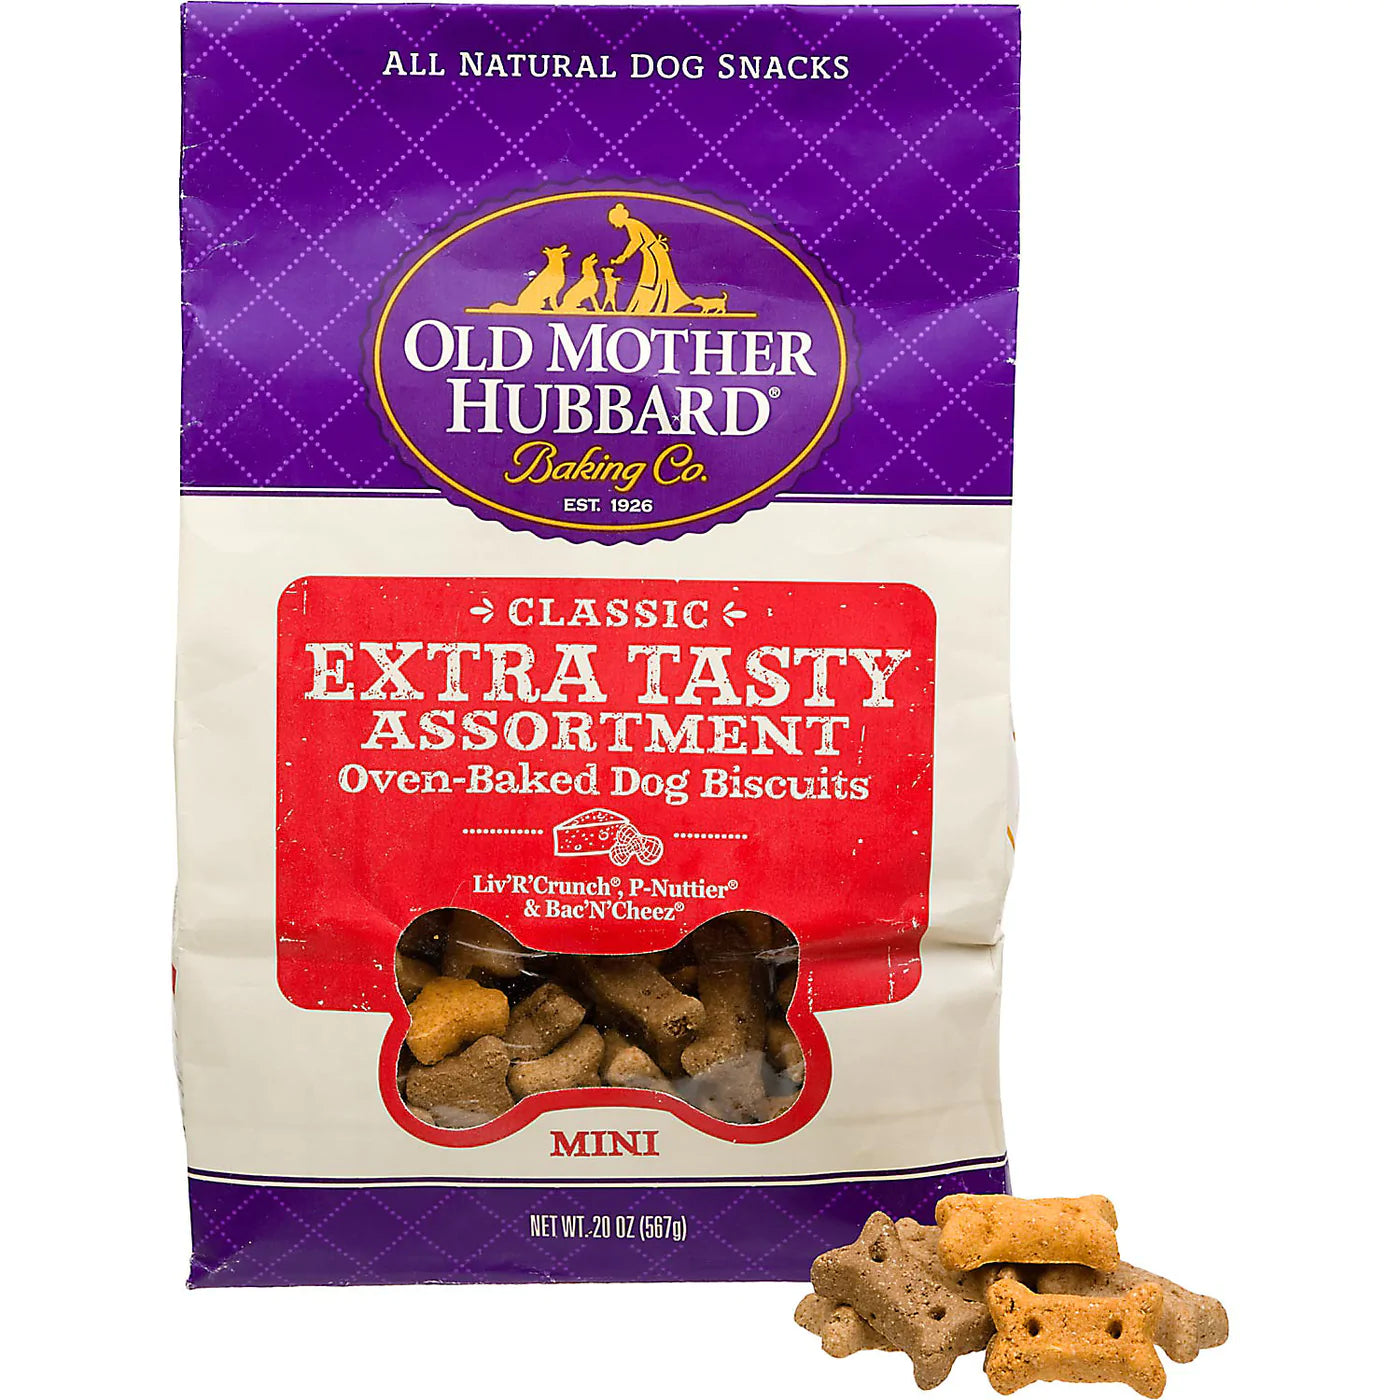 OLD MOTHER HUBBARD CRUNCHY CLASSIC BISCUITS: EXTRA TASTY ASSORTMENT